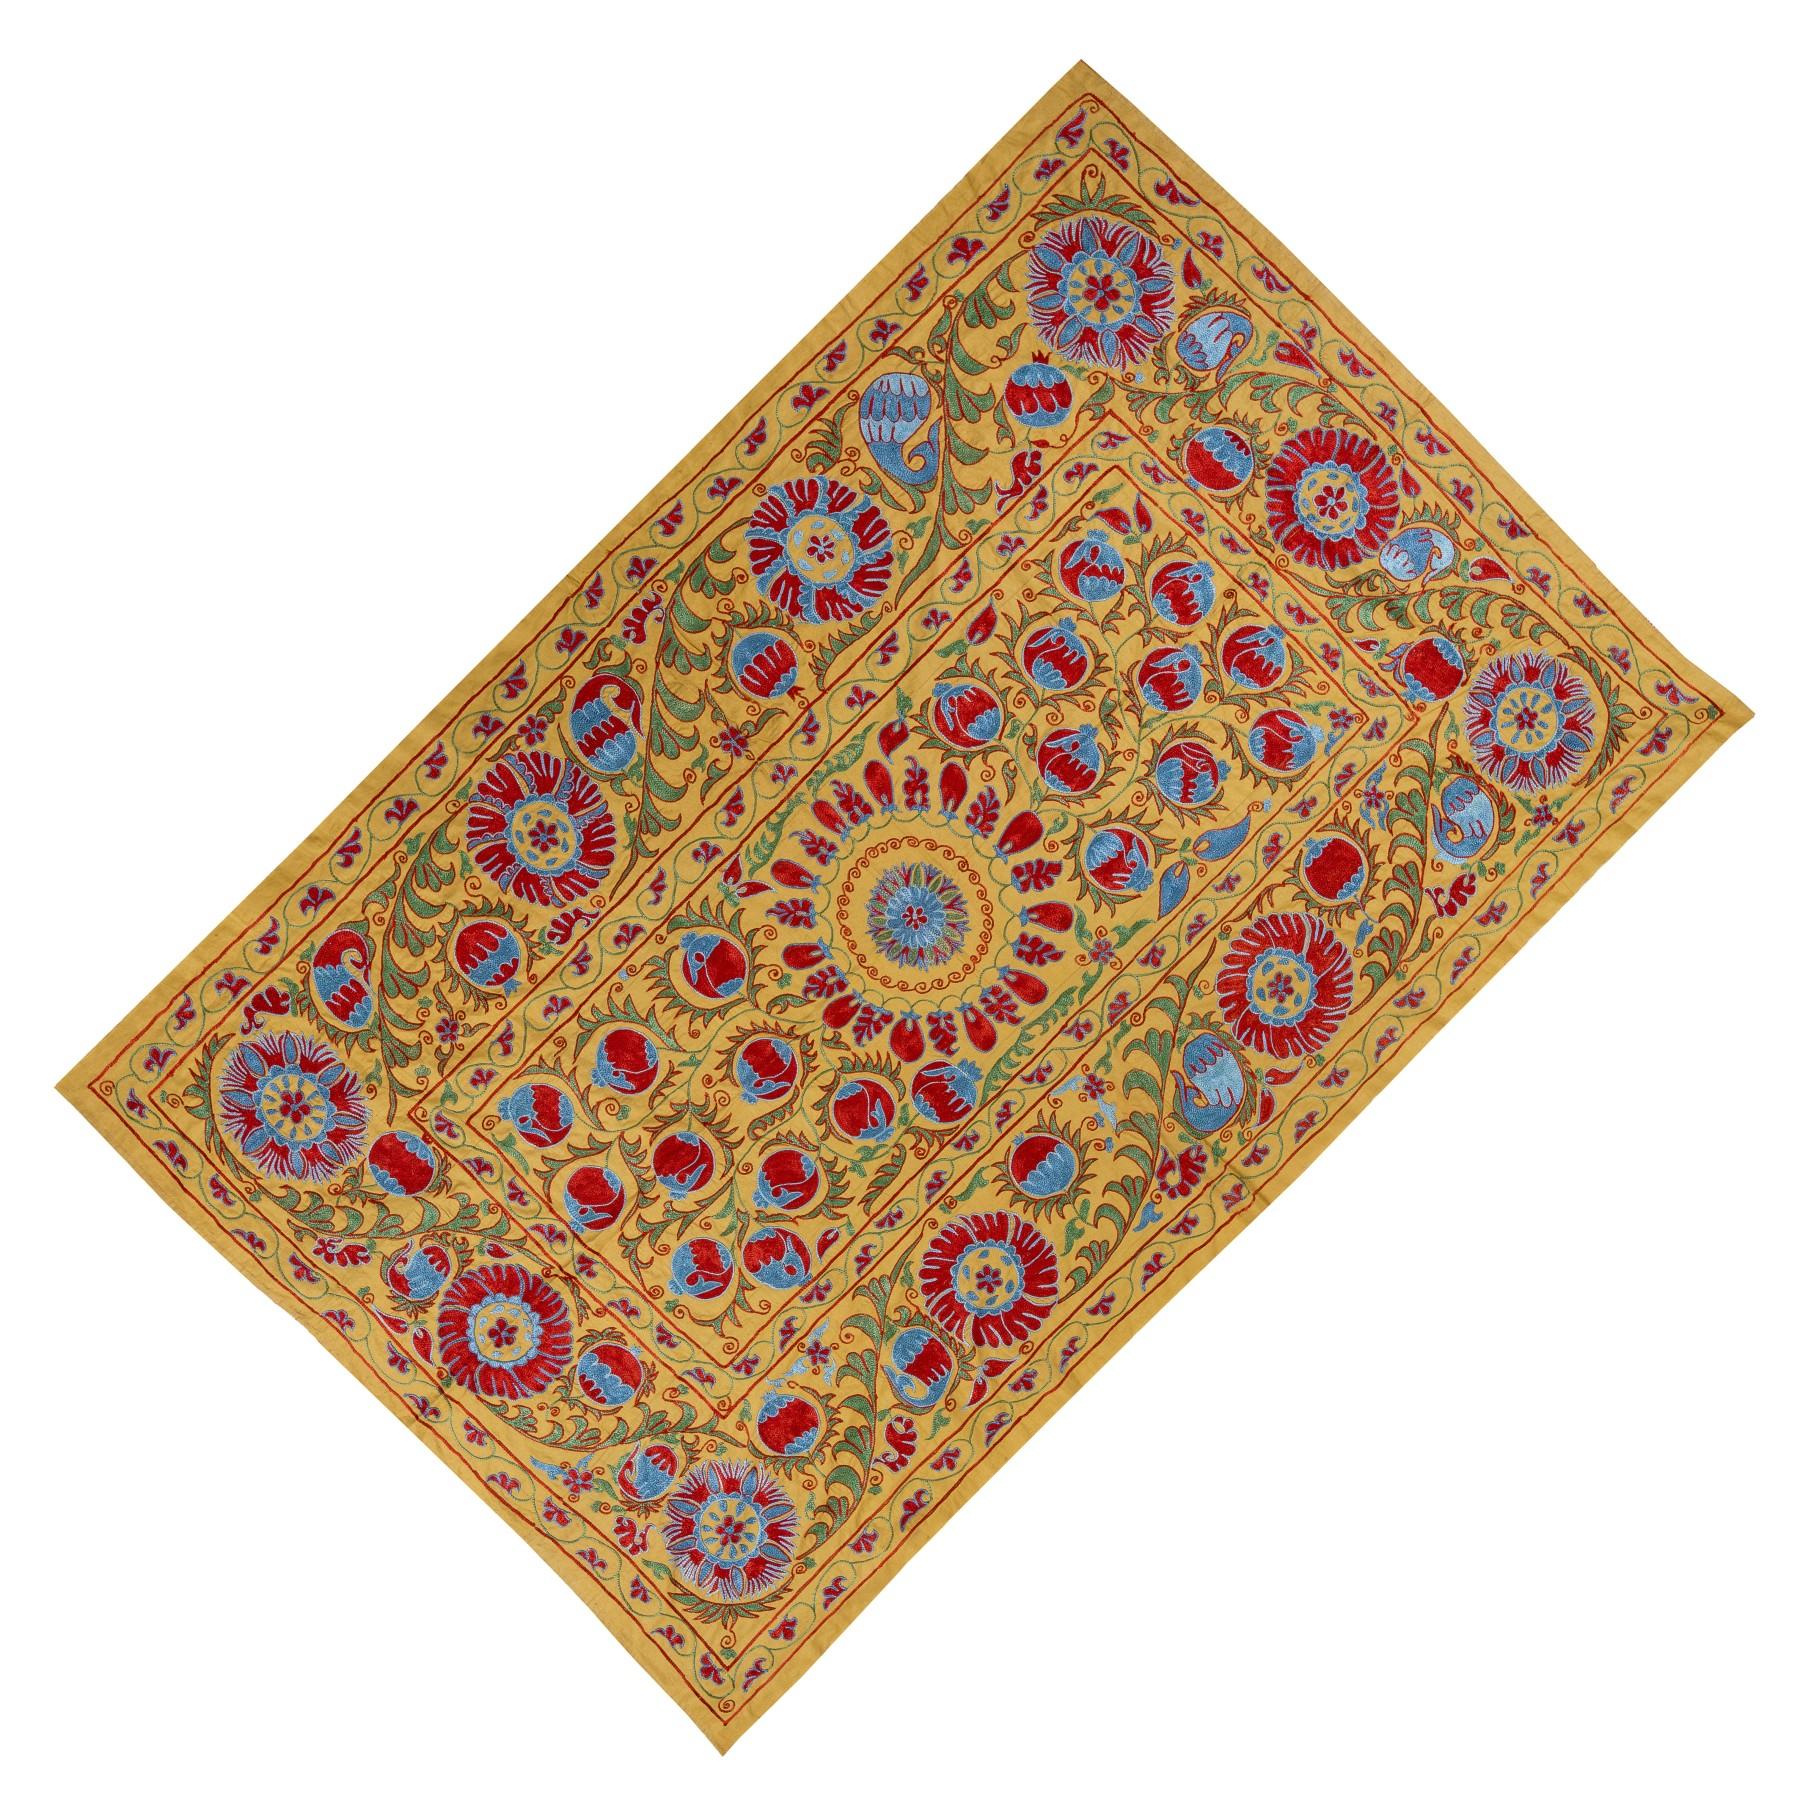 Contemporary Brand New Uzbek Suzani Textile, Embroidered Cotton & Silk Wall Hanging For Sale